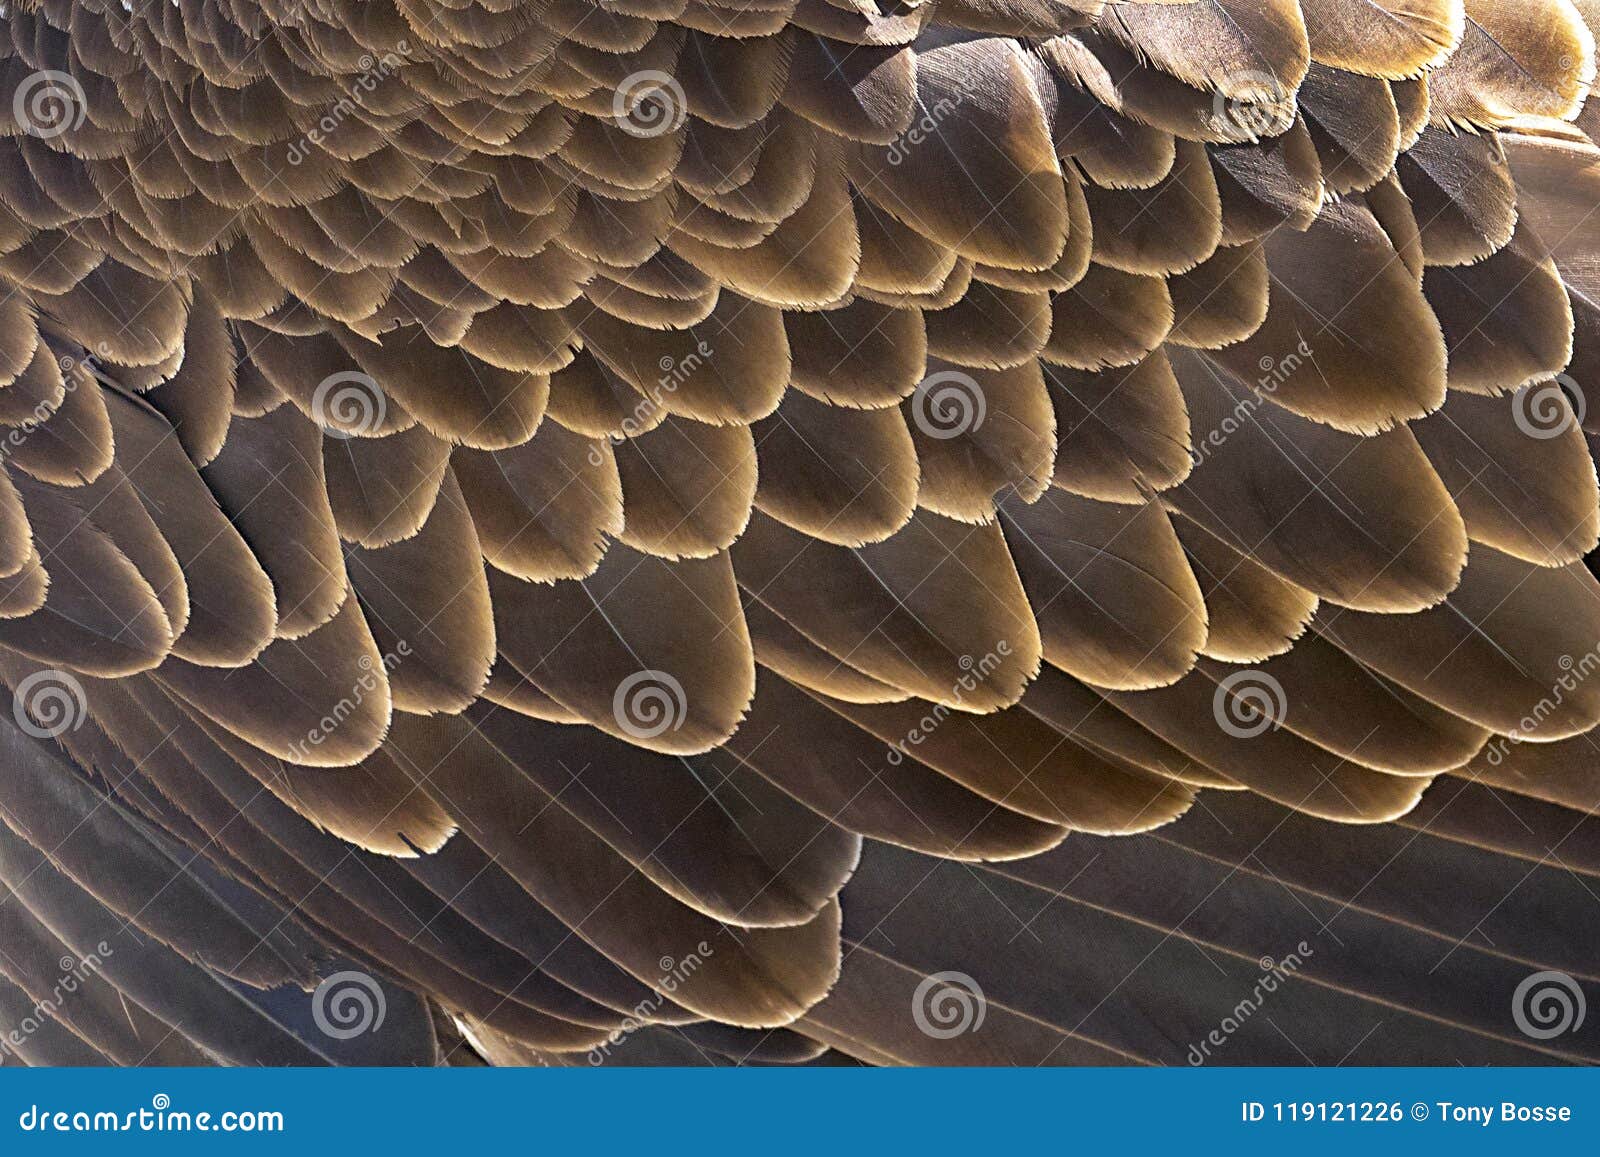 bald eagle wing feathers background